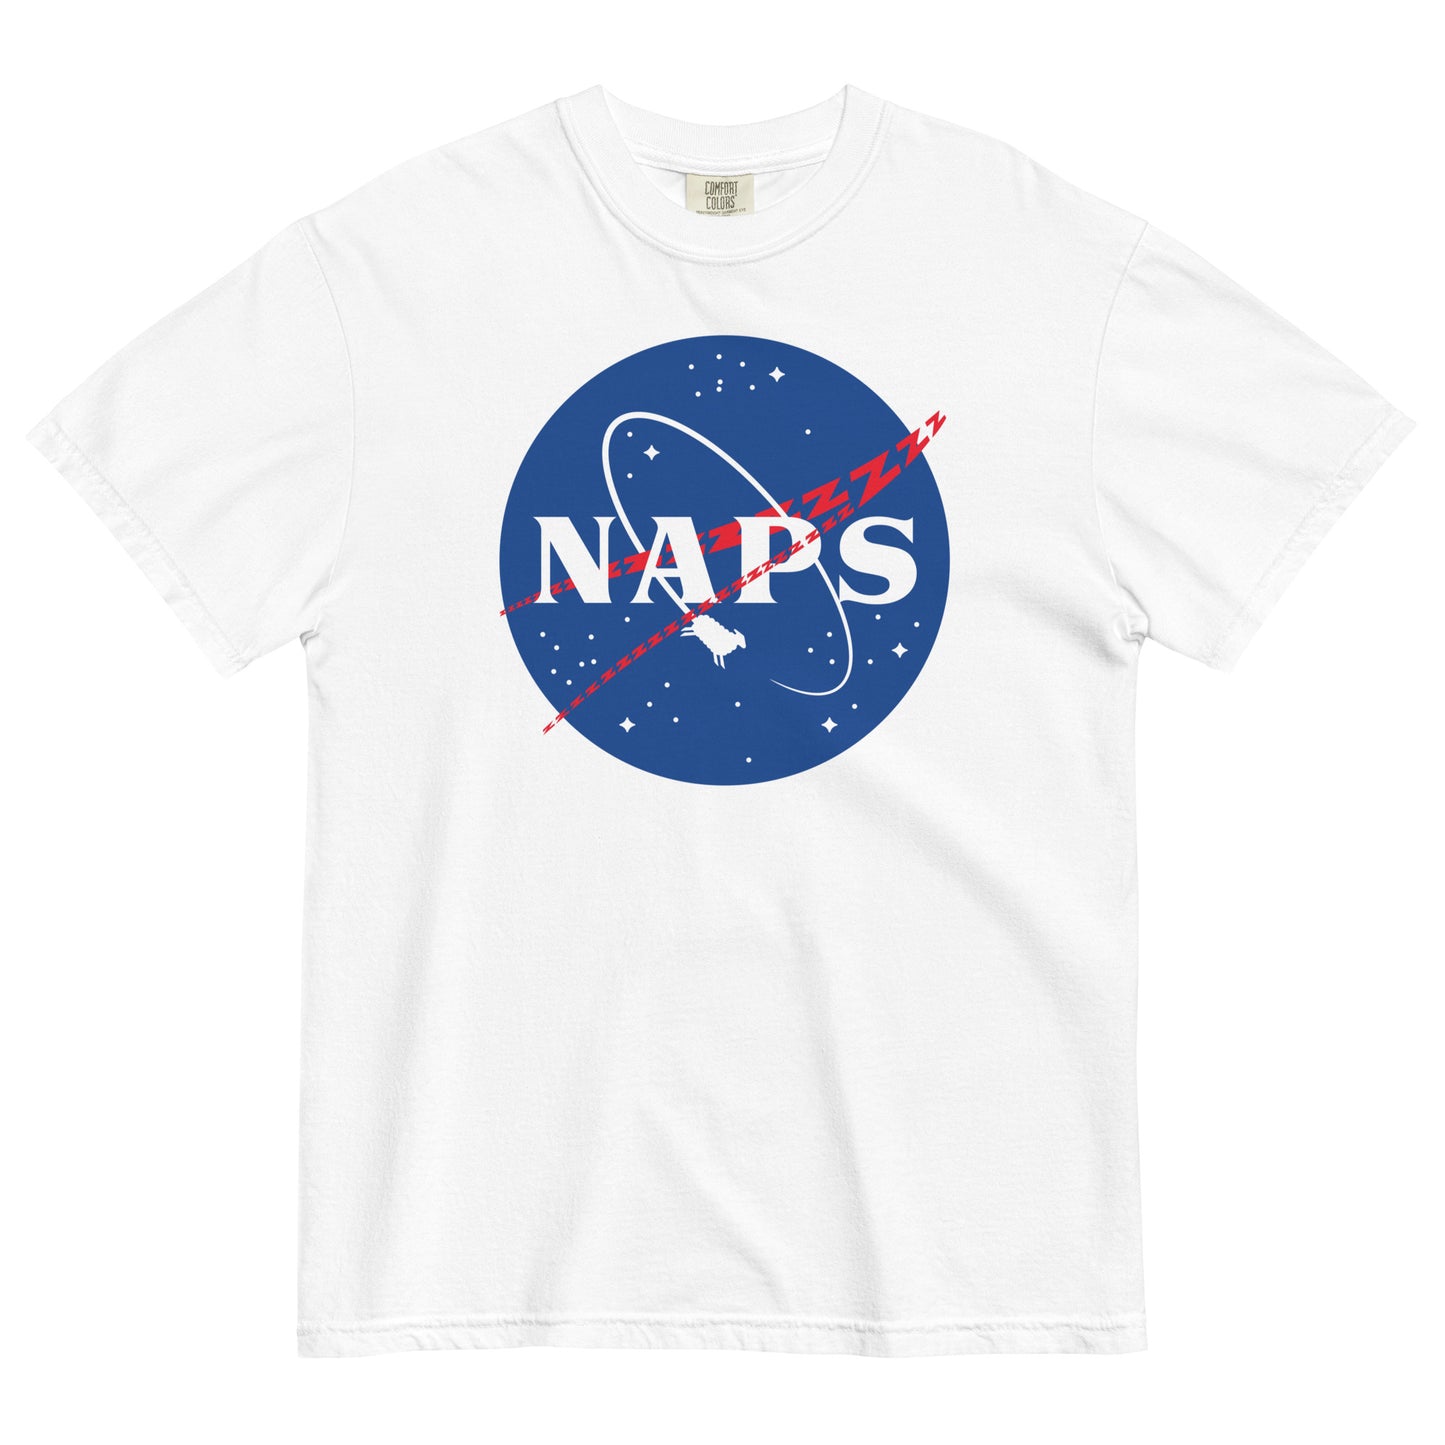 NAPS Men's Relaxed Fit Tee